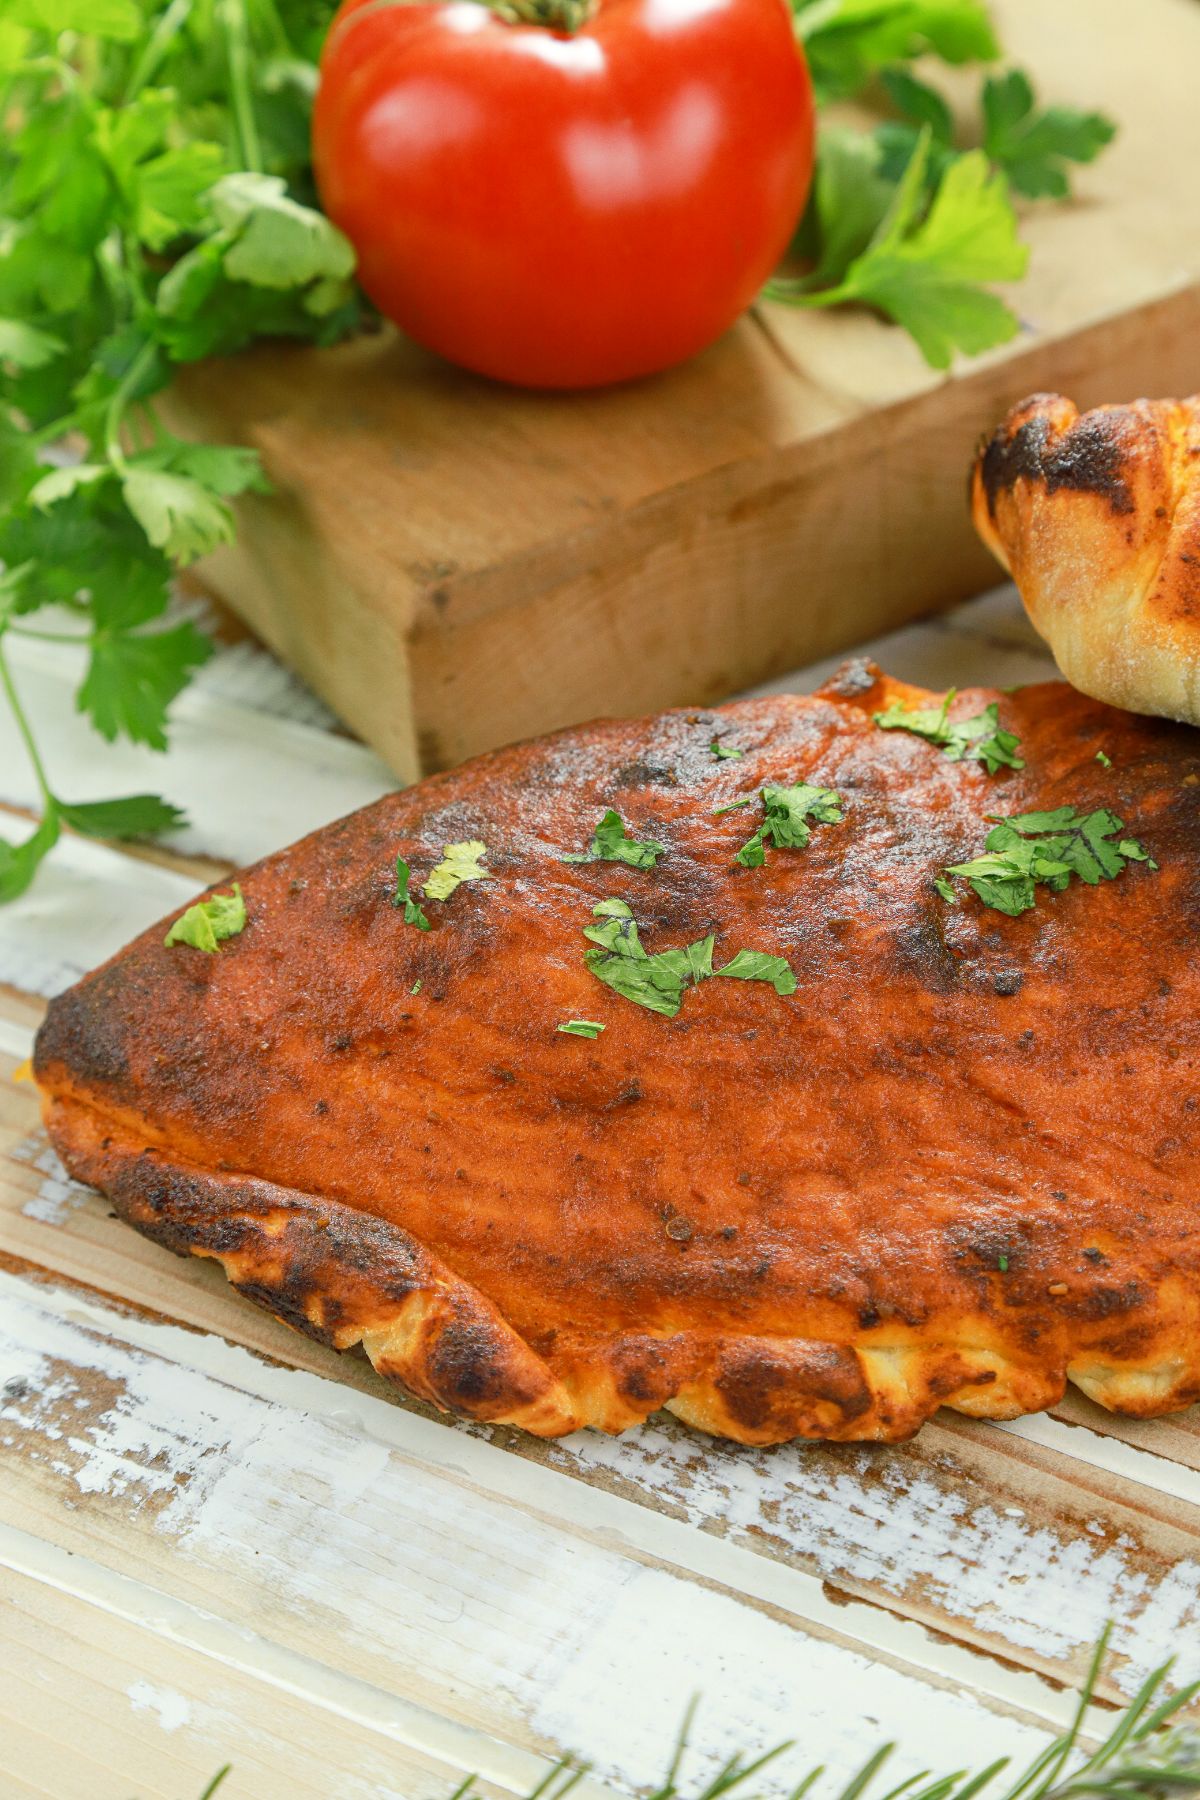 calzone on table by wood cutting board and tomatoes